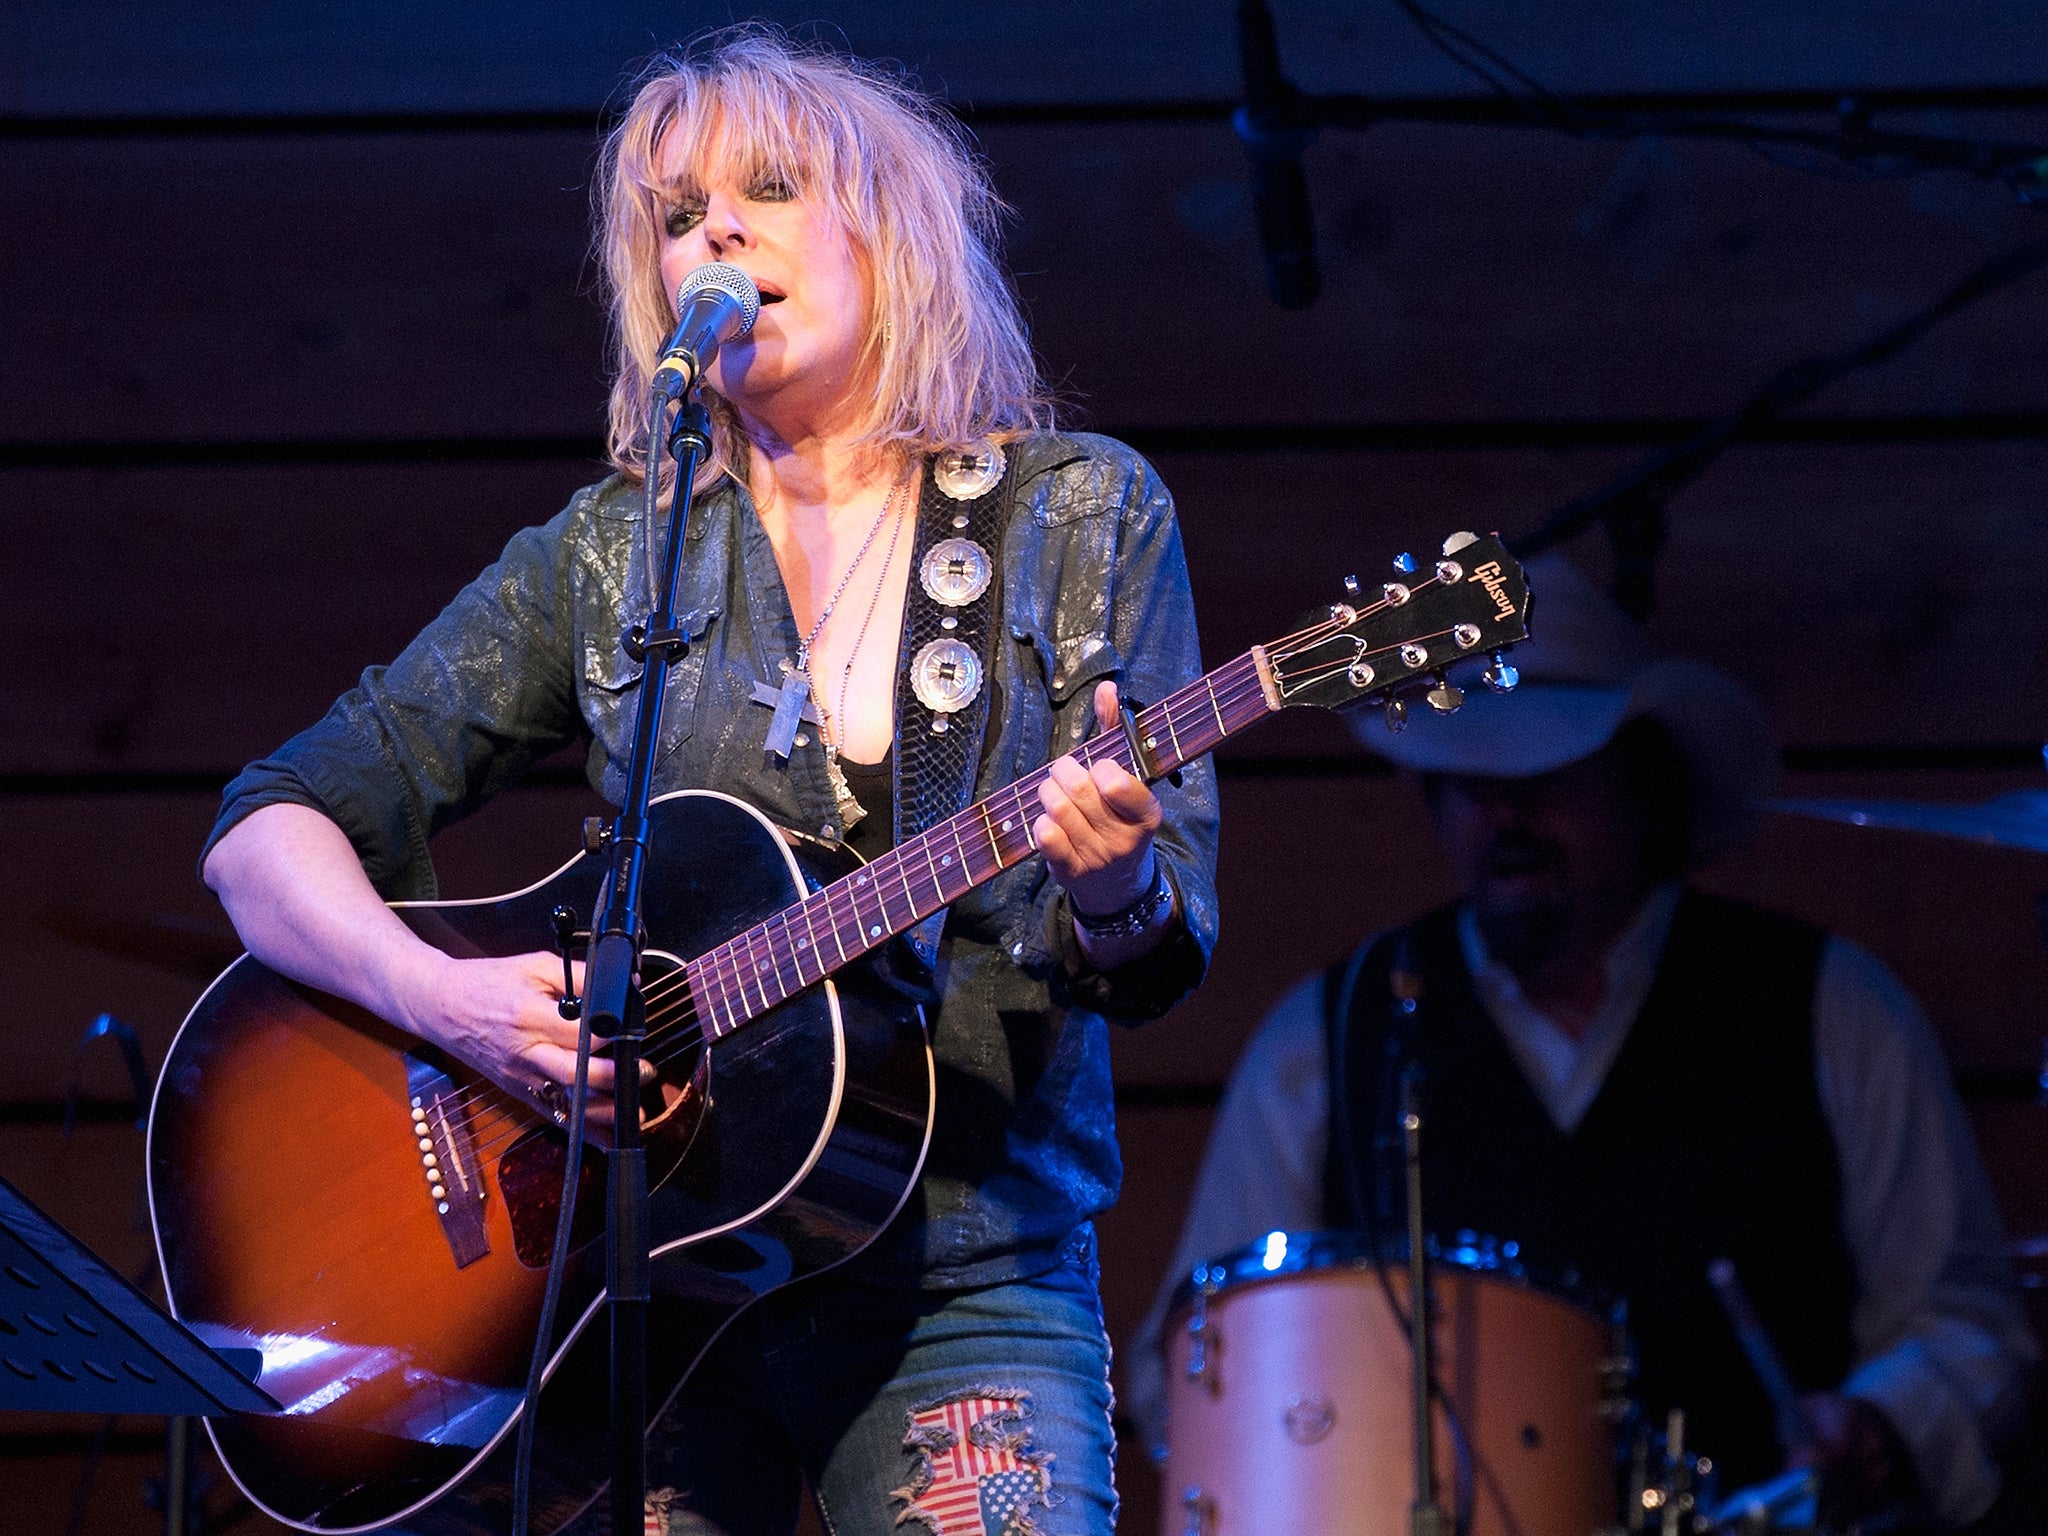 Lucinda Williams performs at City Winery on September 21, 2014 in Nashville, Tennessee. (Photo by Erika Goldring/Getty Images for Americana Music)